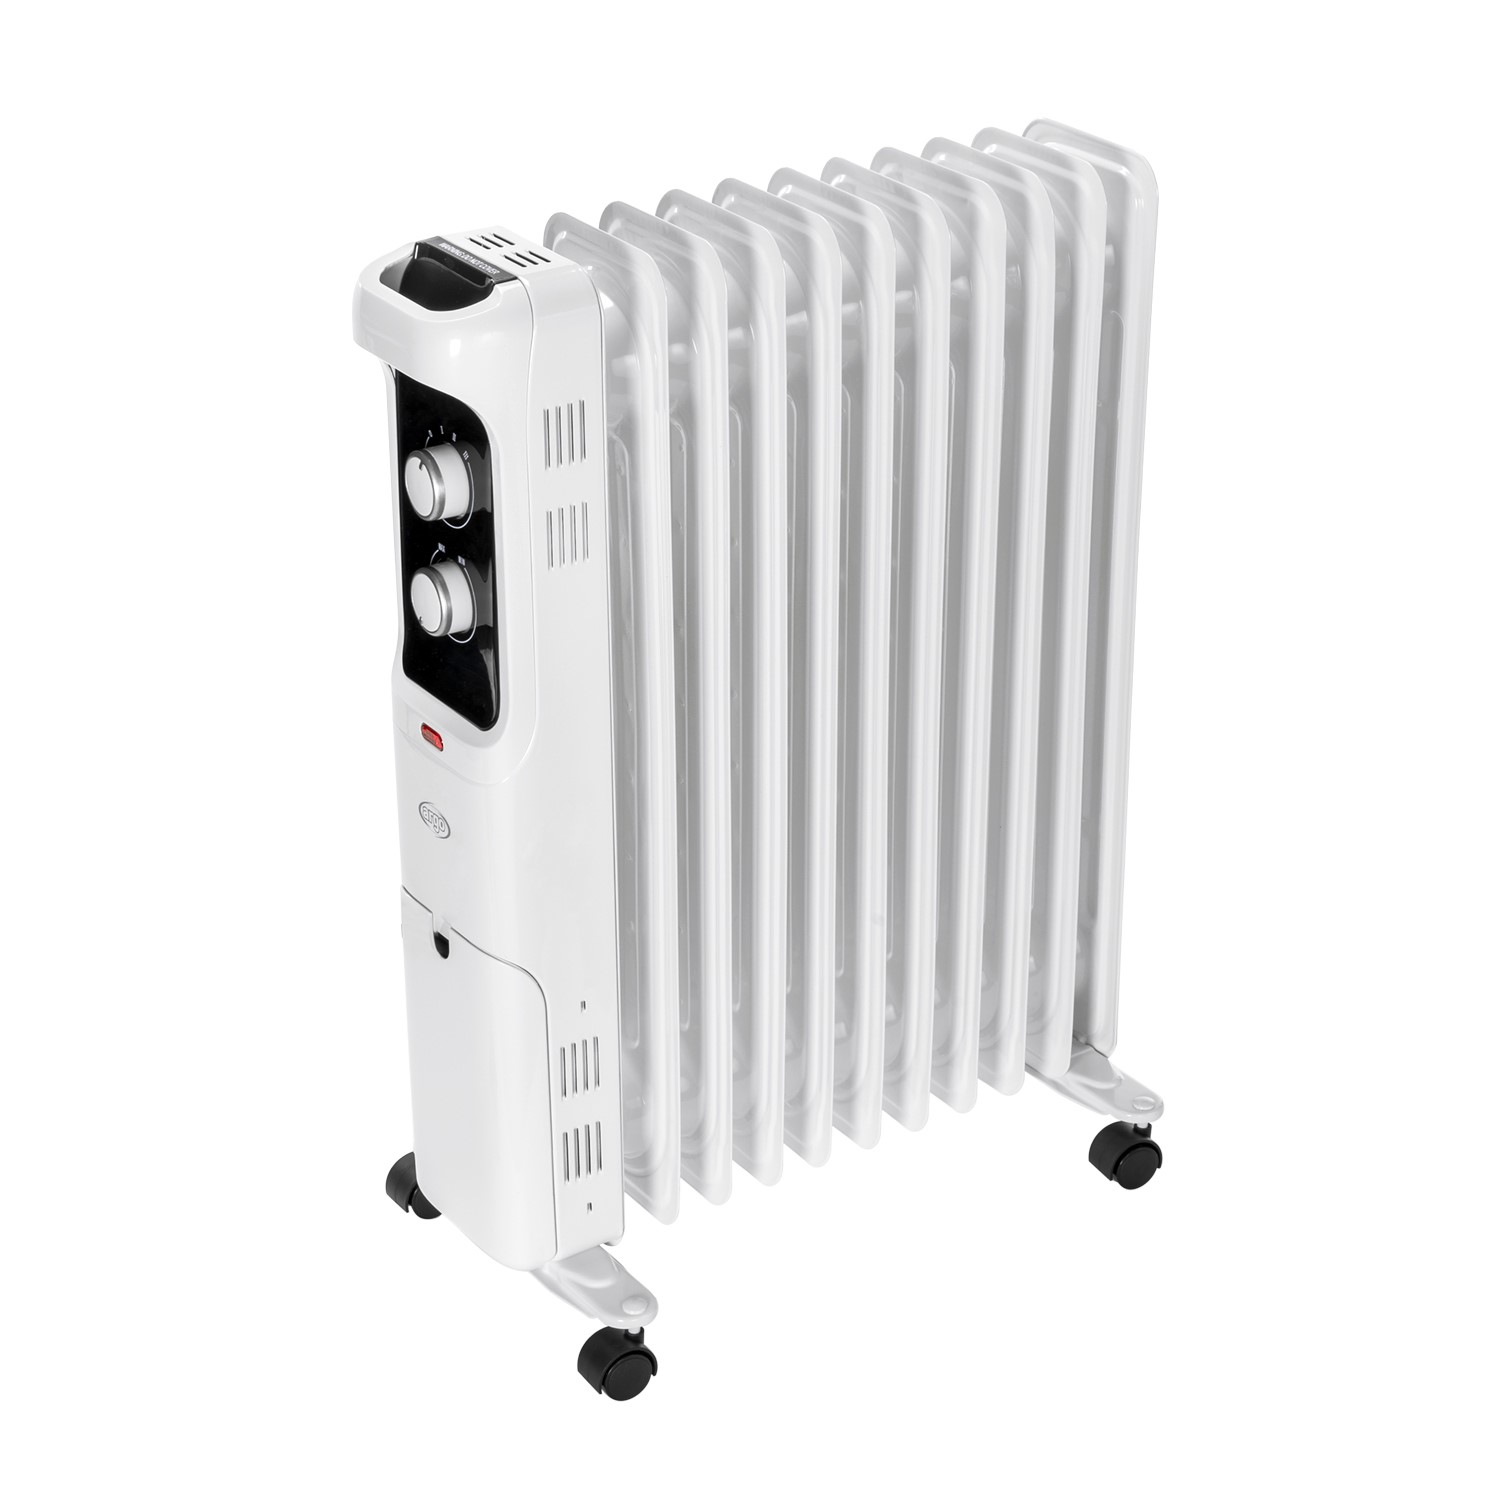 Refurbished Argo Whisper 2.5 kw Oil Filled Radiator 10 fin with Thermostat